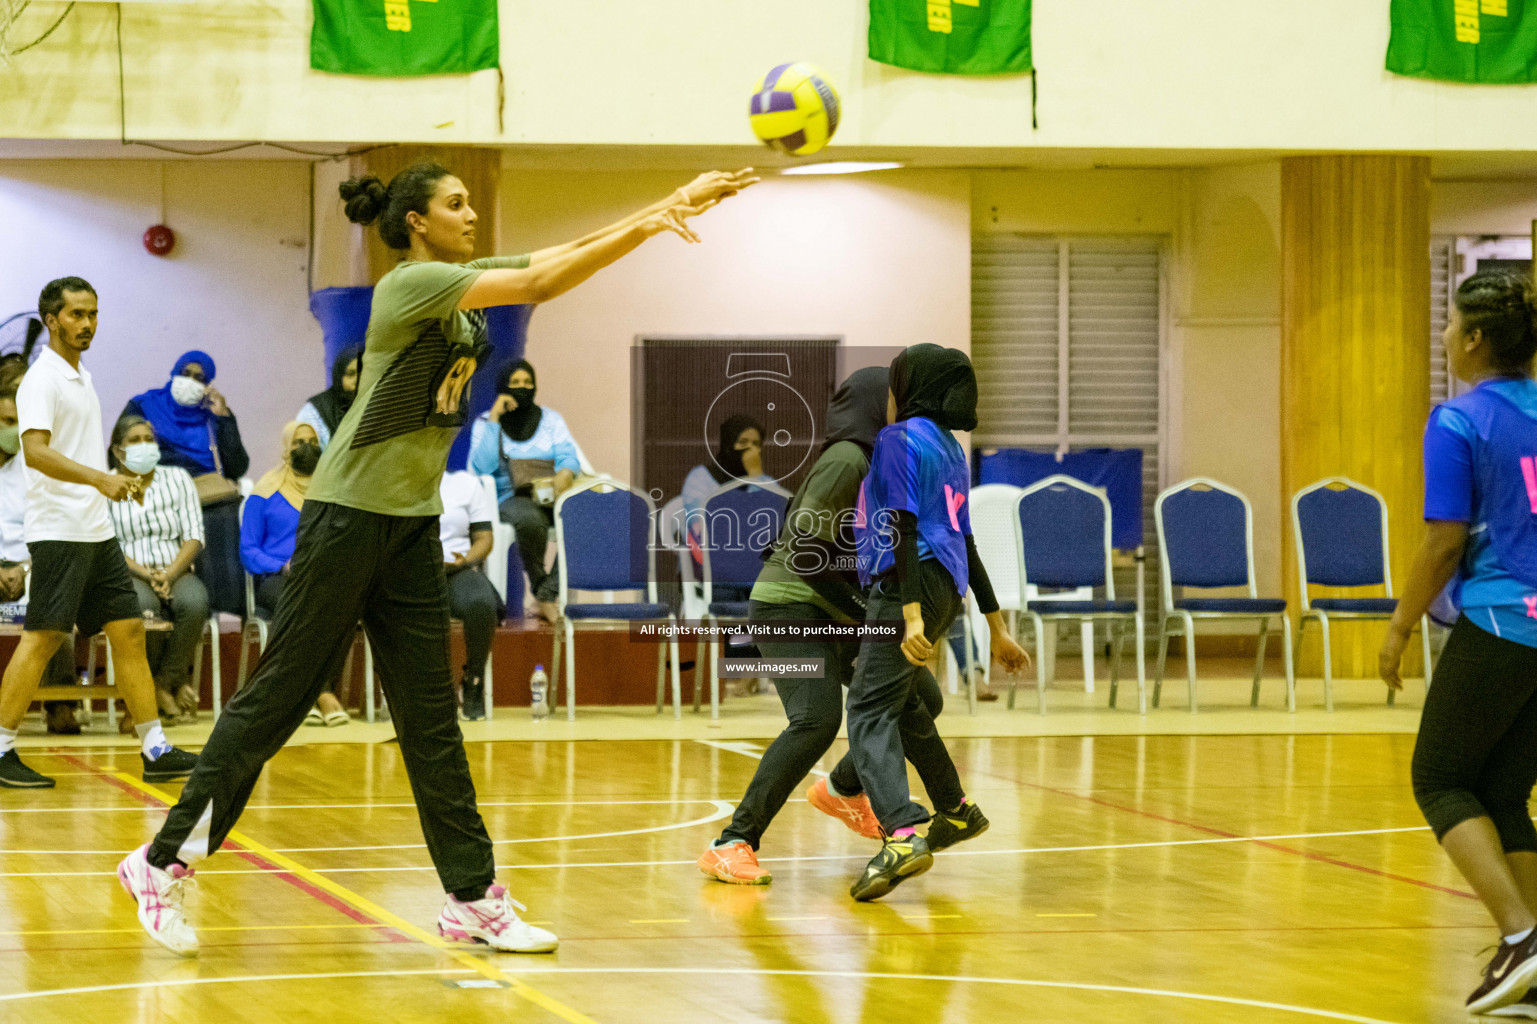 Milo National Netball Tournament 2021 held from 22 November to 05 December 2021 in Social Center Indoor Court, Male, Maldives